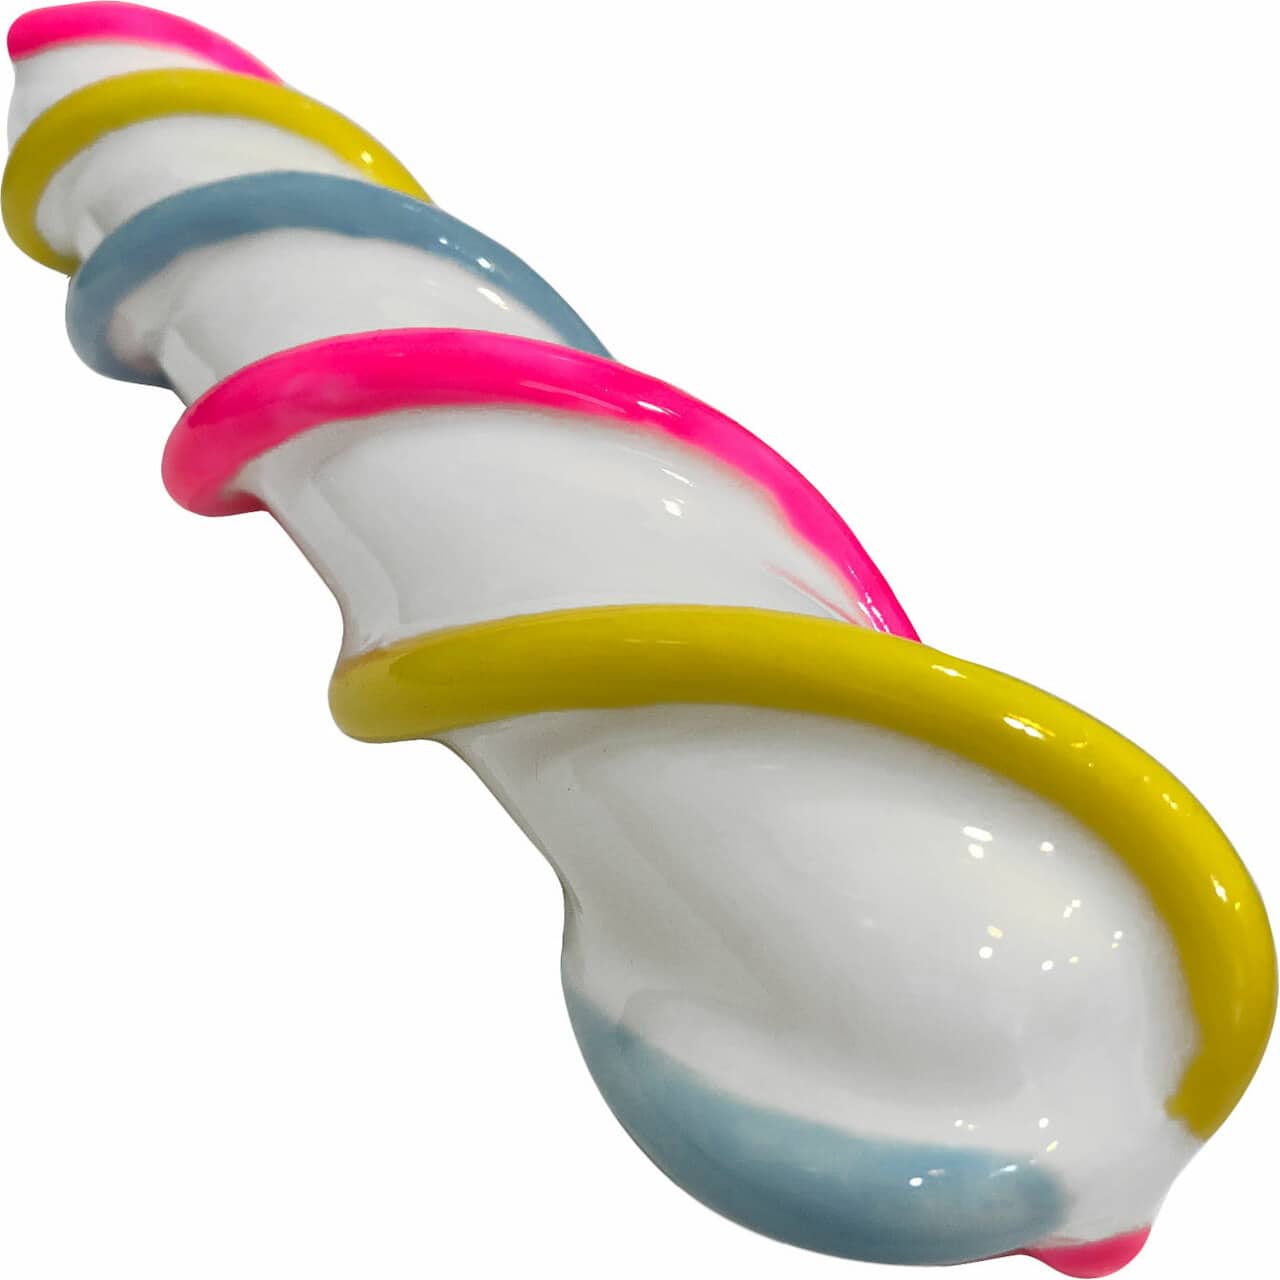 Marshmallow Super Soft Silicone Sweets Twisty Dildo. Slide 2